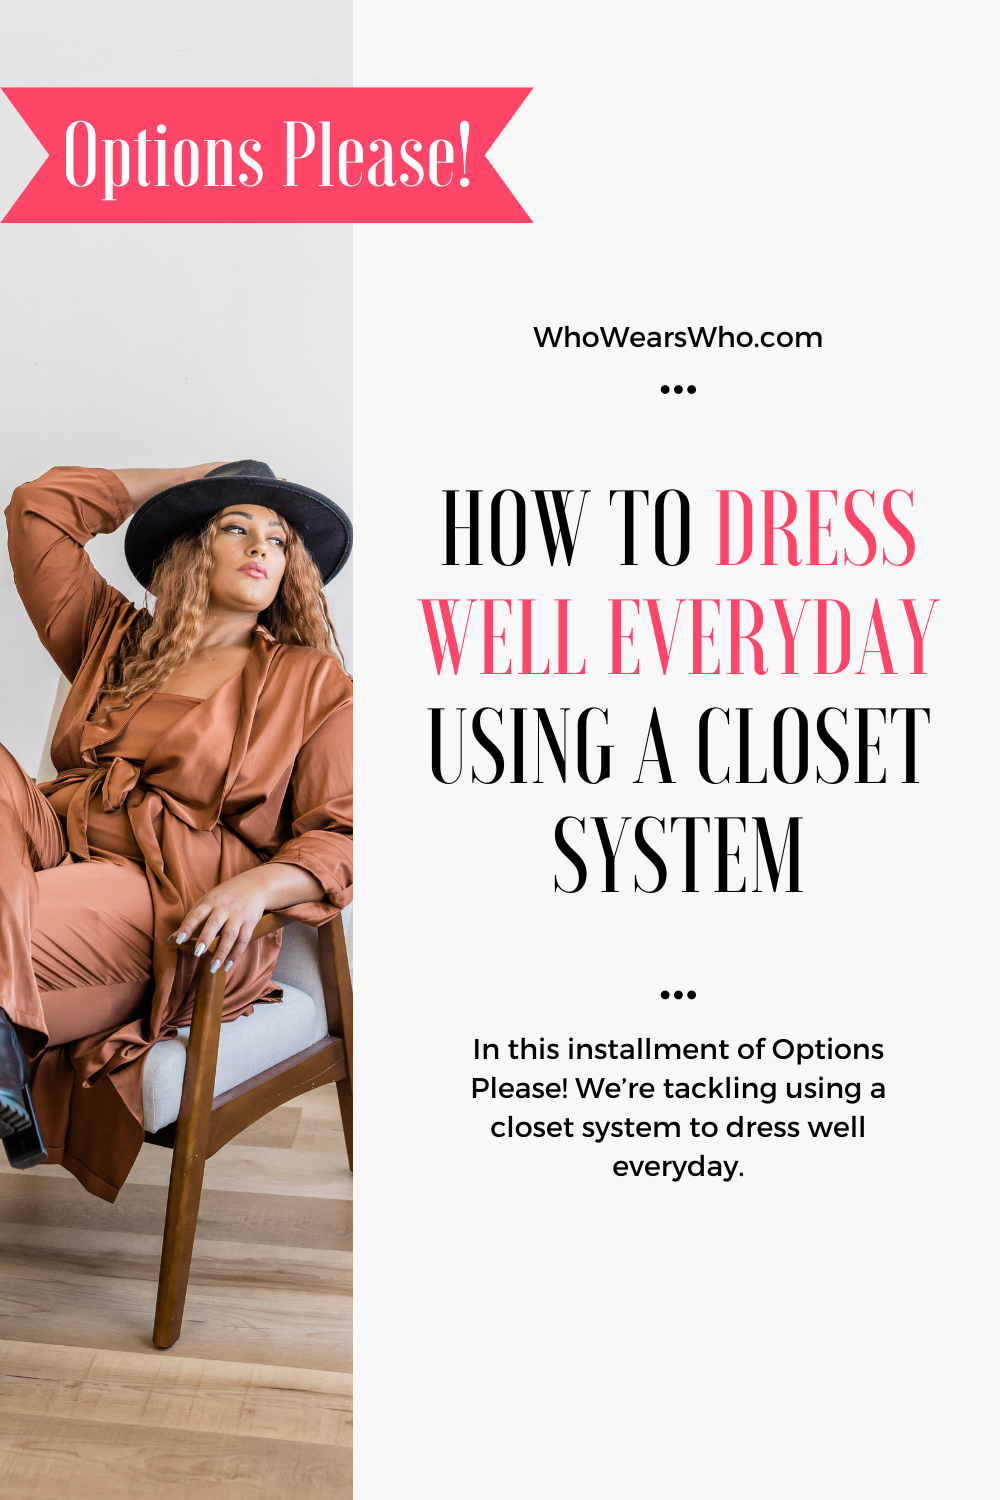 How to dress well ev﻿eryday using a closet system